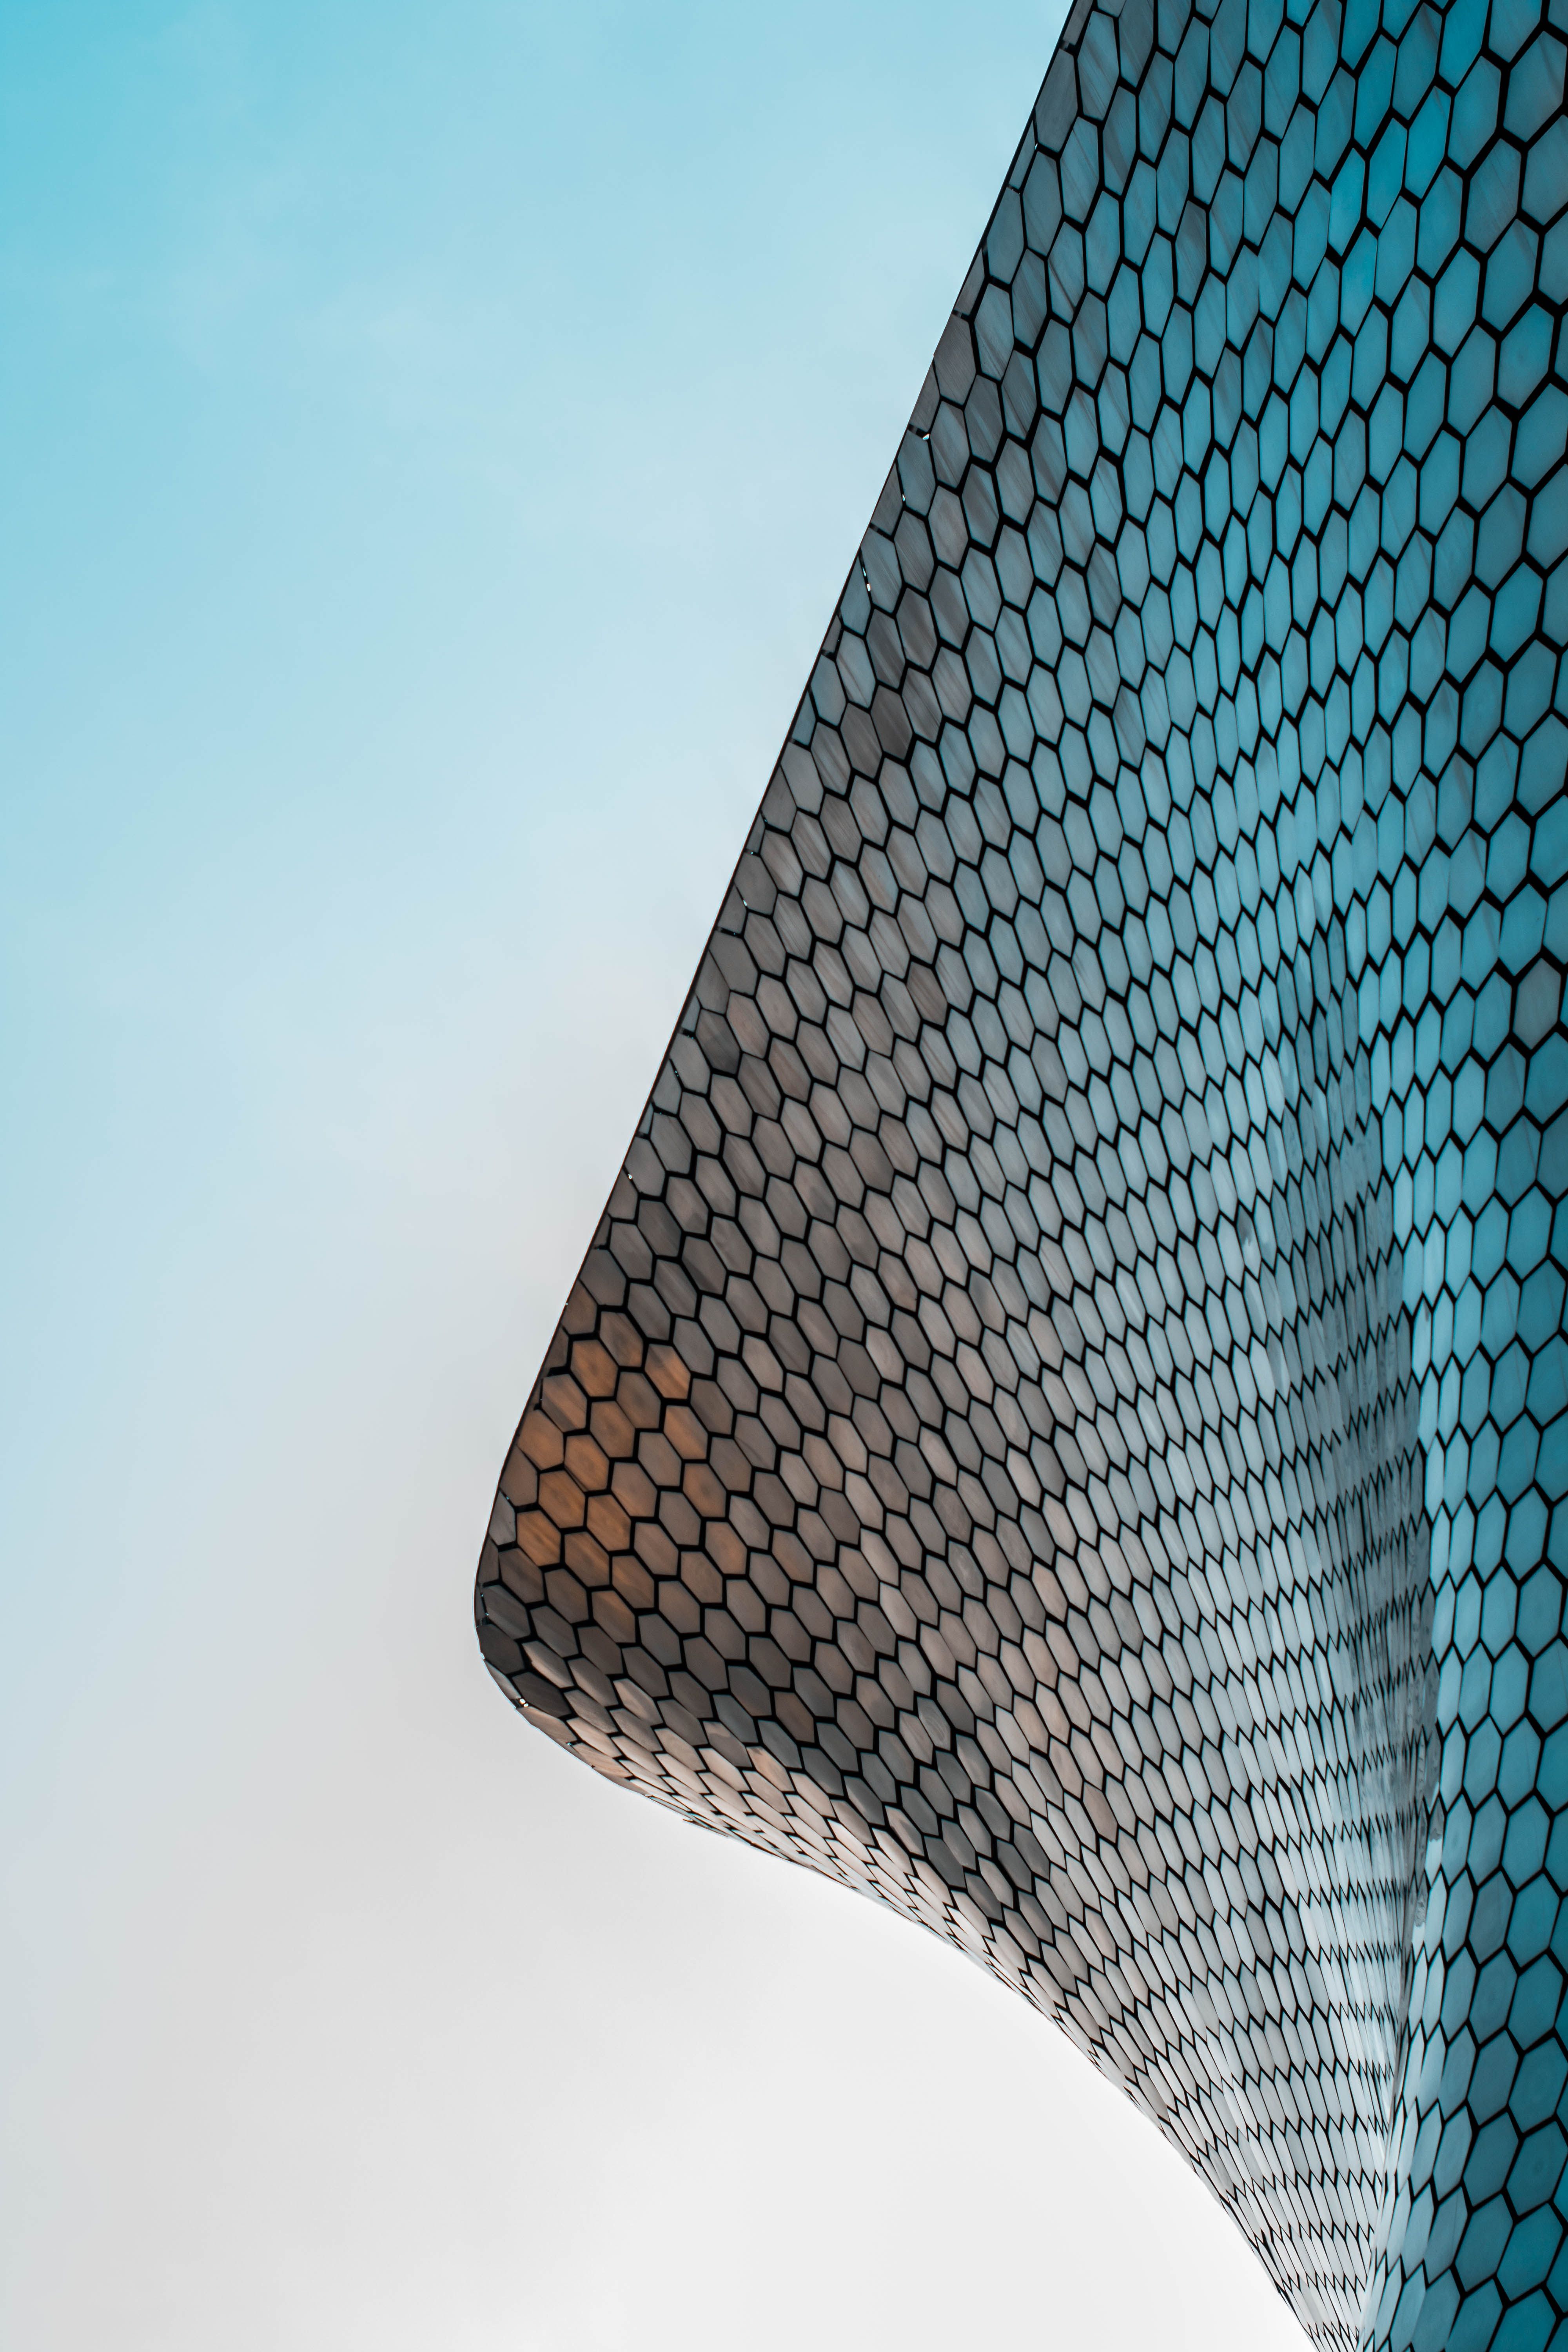 A building with a honeycomb pattern on its facade. - Architecture